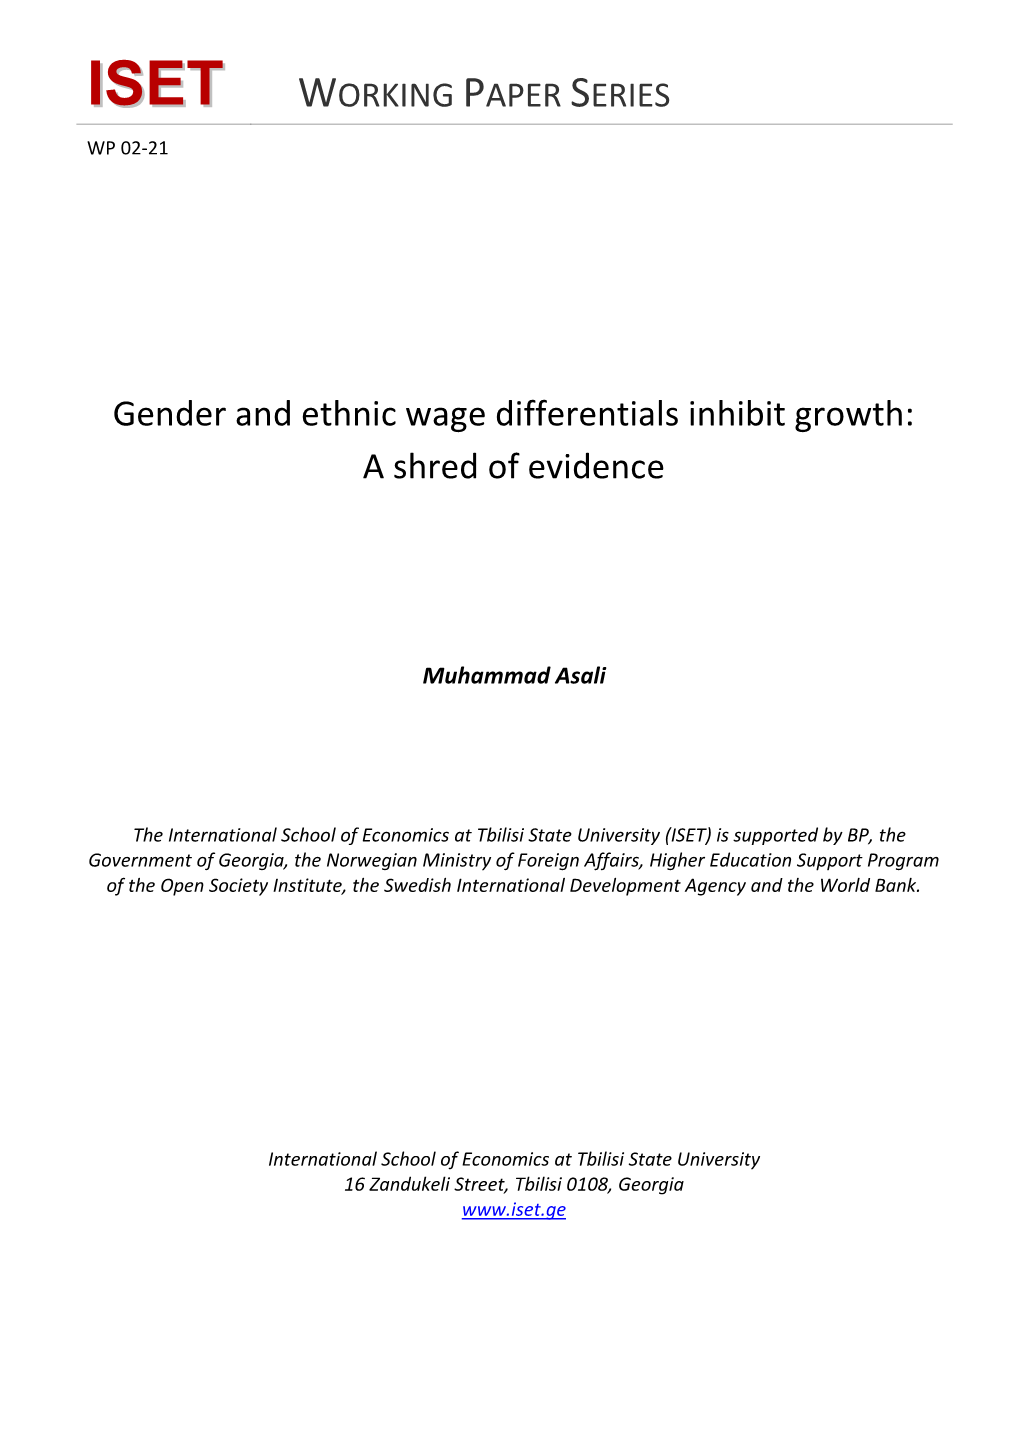 Gender and Ethnic Wage Differentials Inhibit Growth: a Shred of Evidence